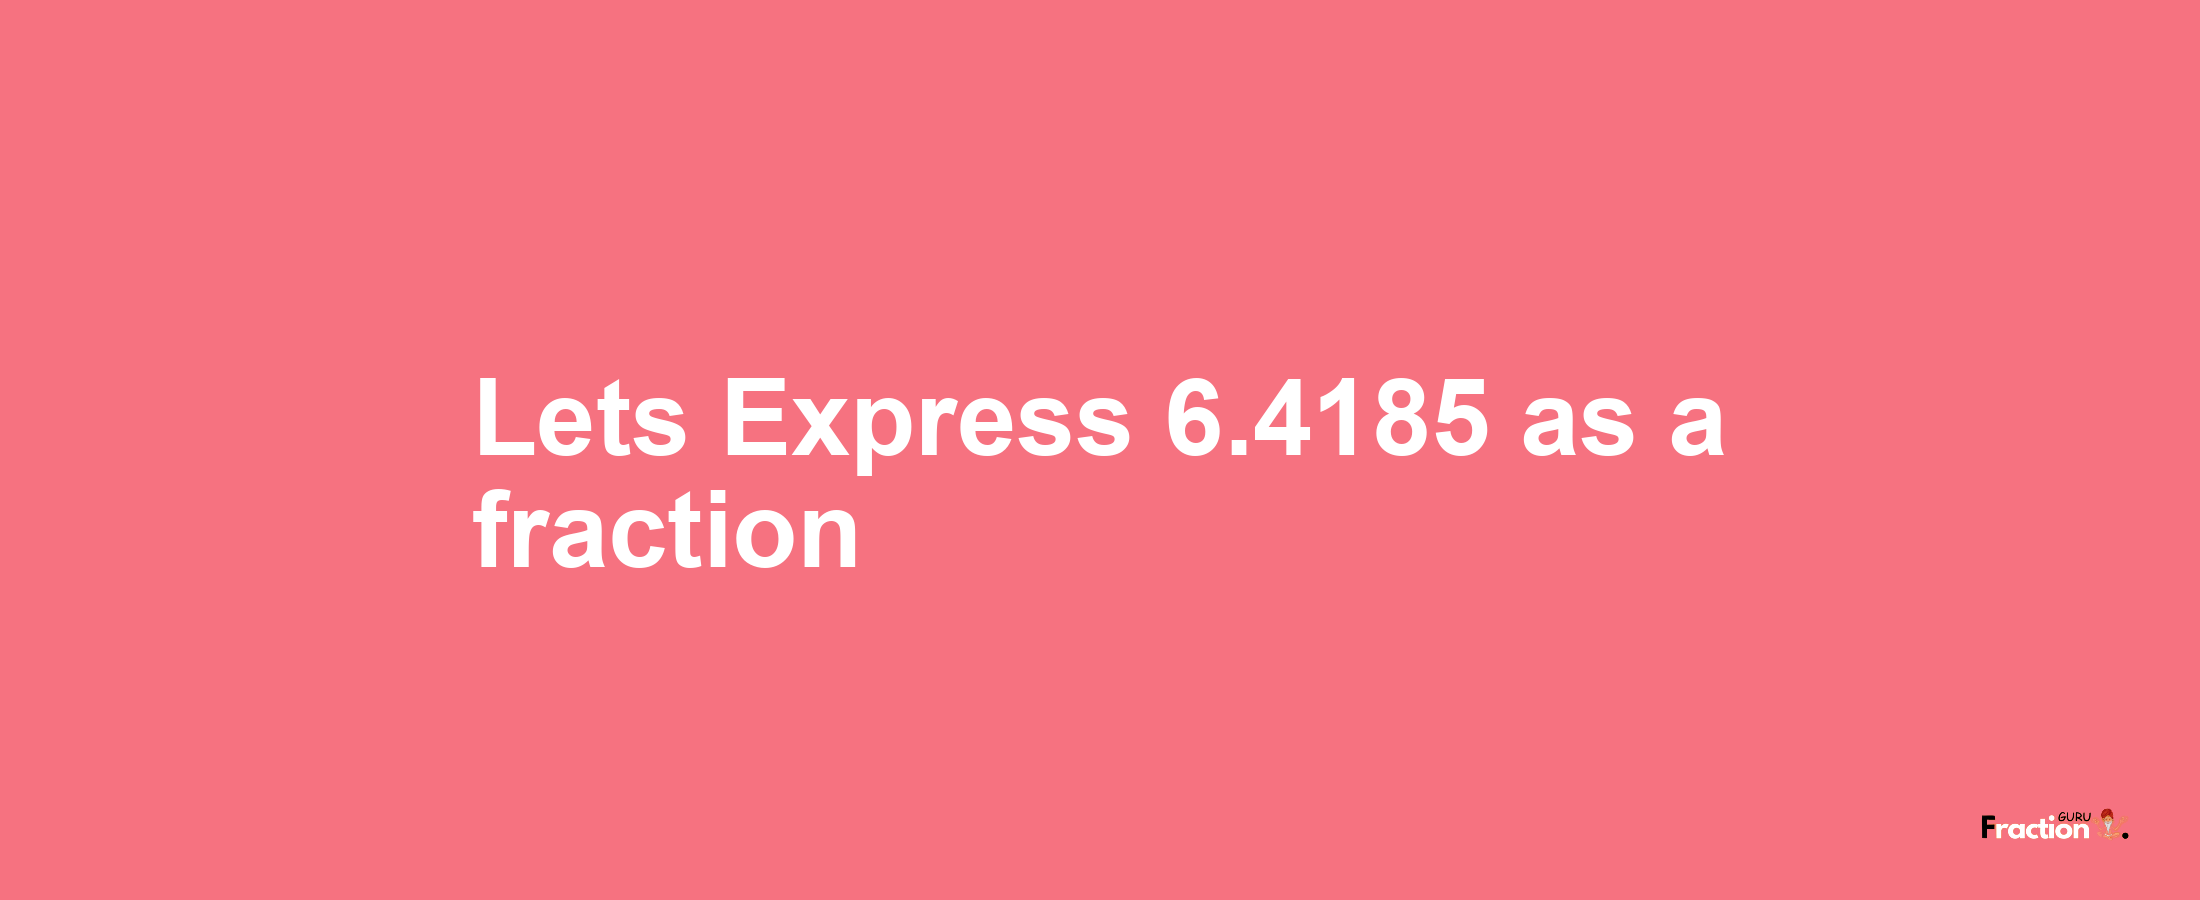 Lets Express 6.4185 as afraction